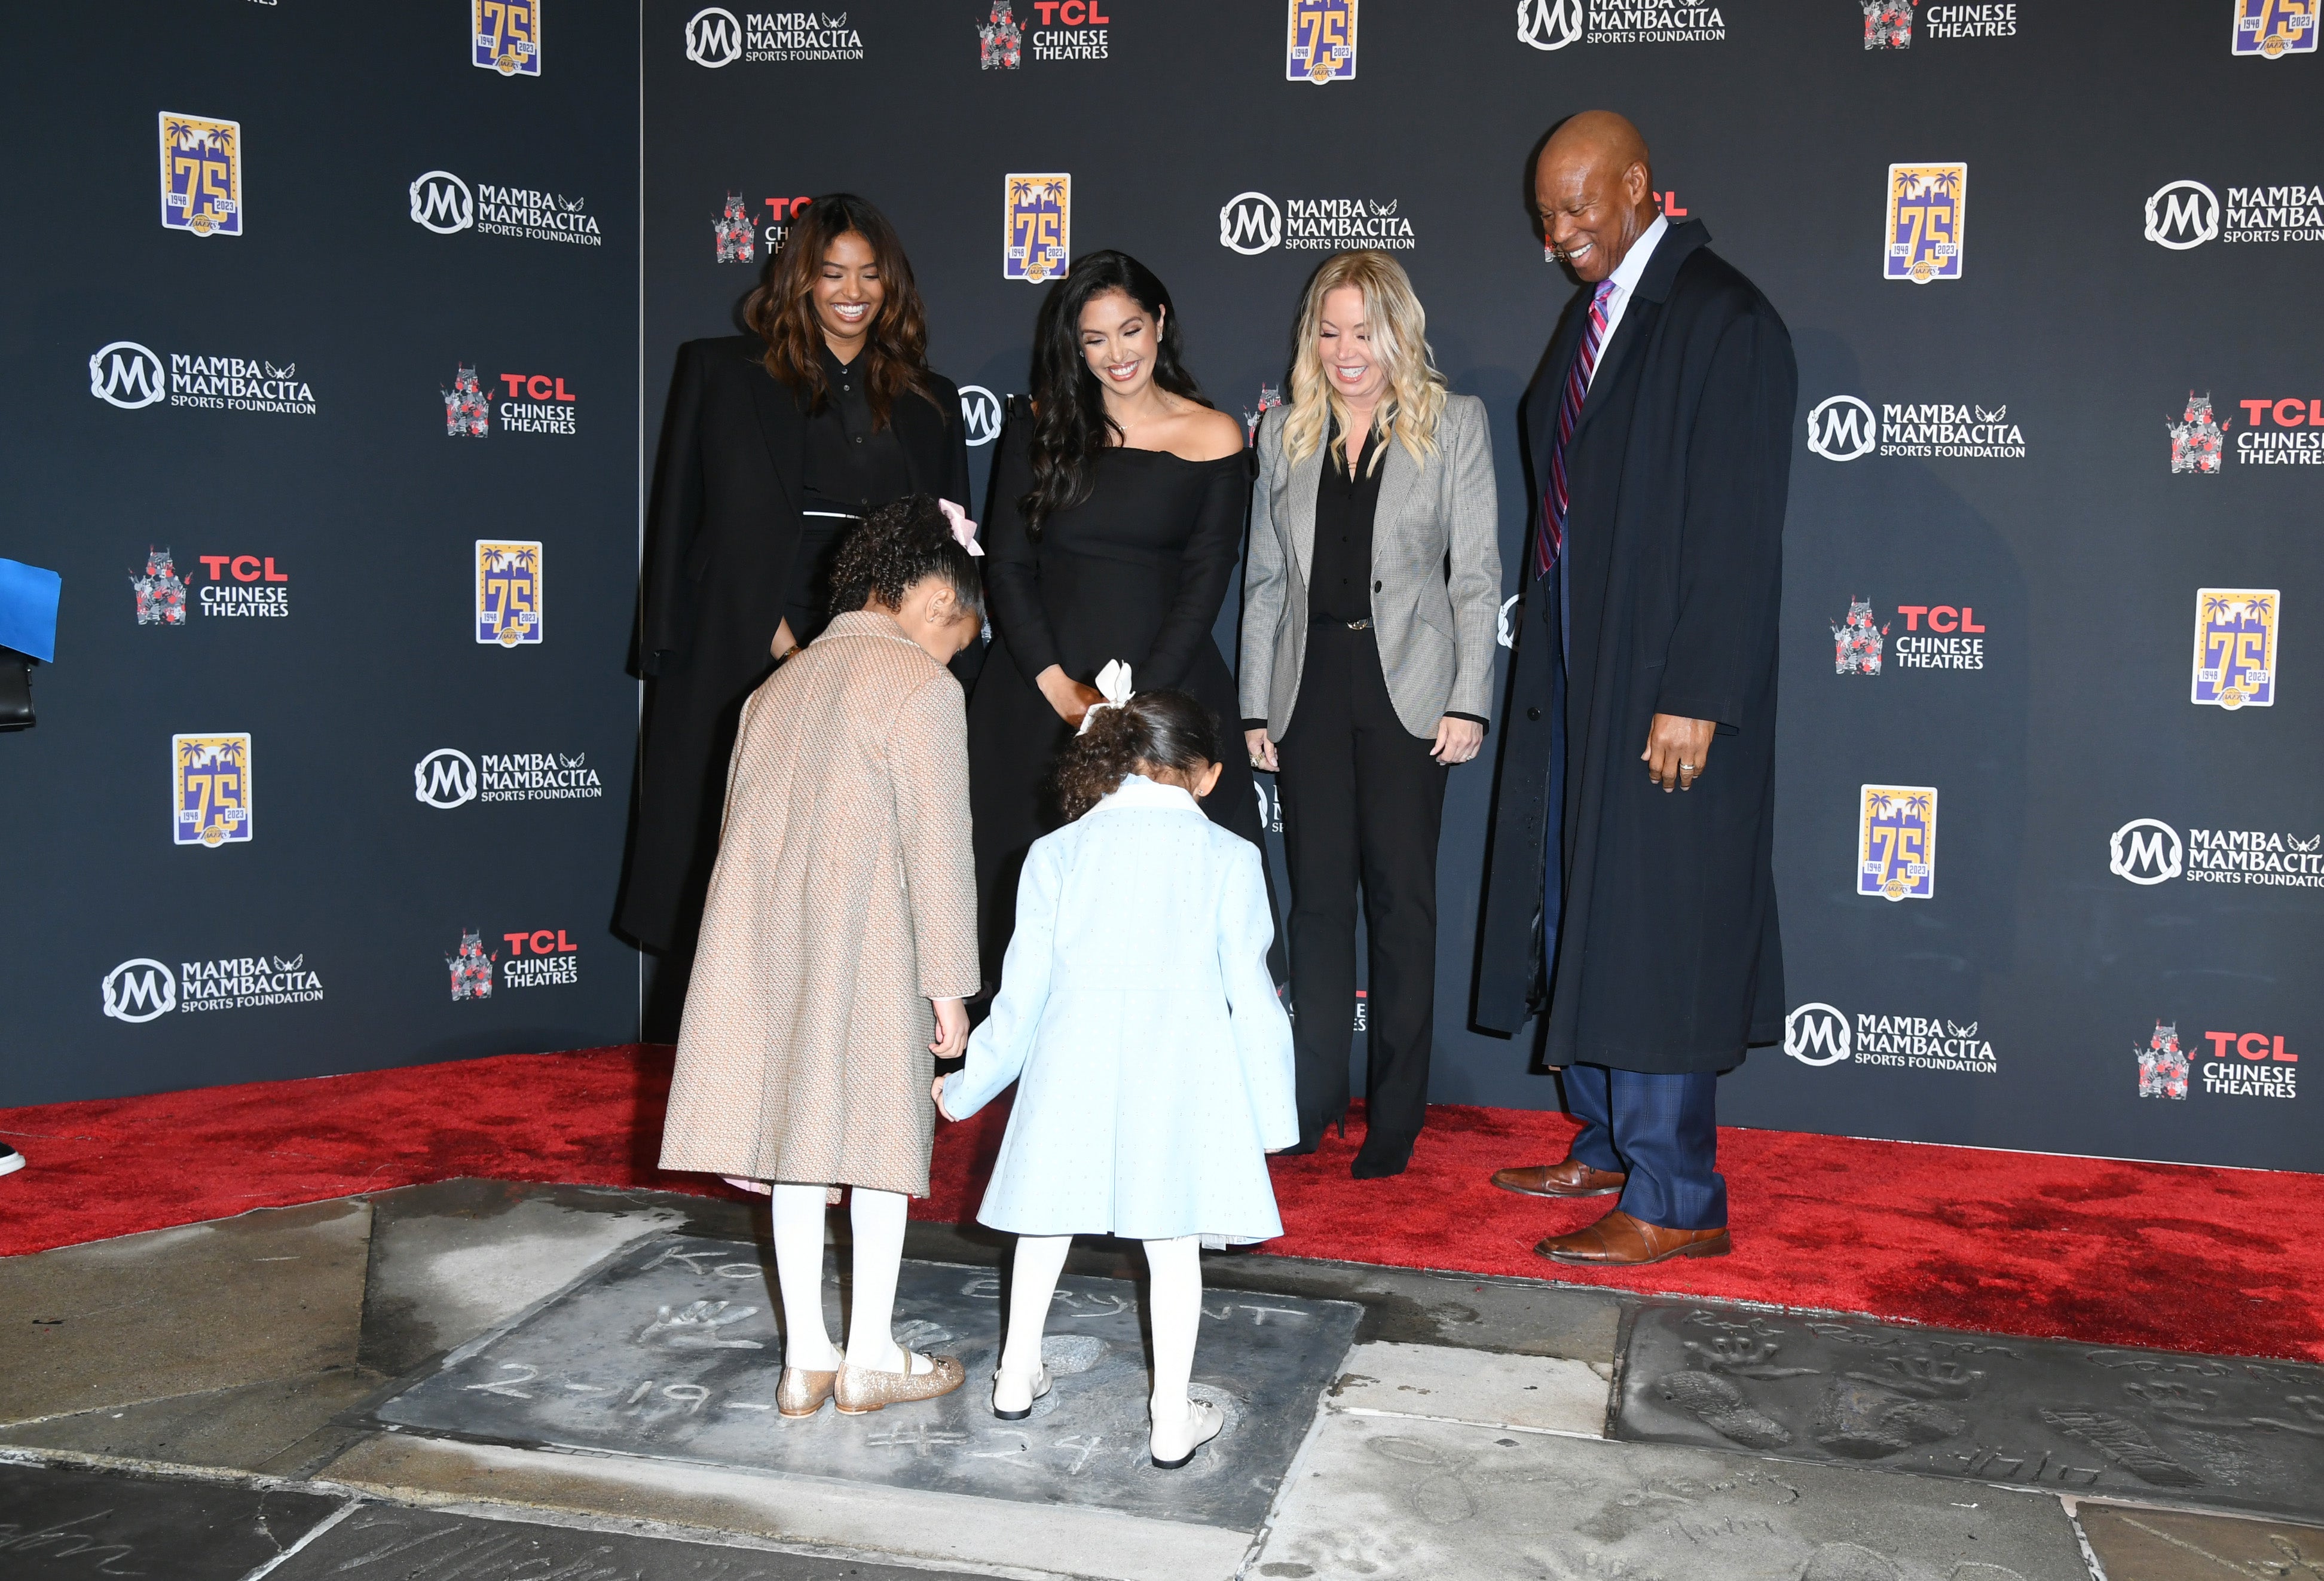 Vanessa Bryant and her daughters Natalia, Bianka and Capri attend ceremony permanently placing Kobe Bryant’s hand and footprints in the forecourt of the TCL Chinese Theatre